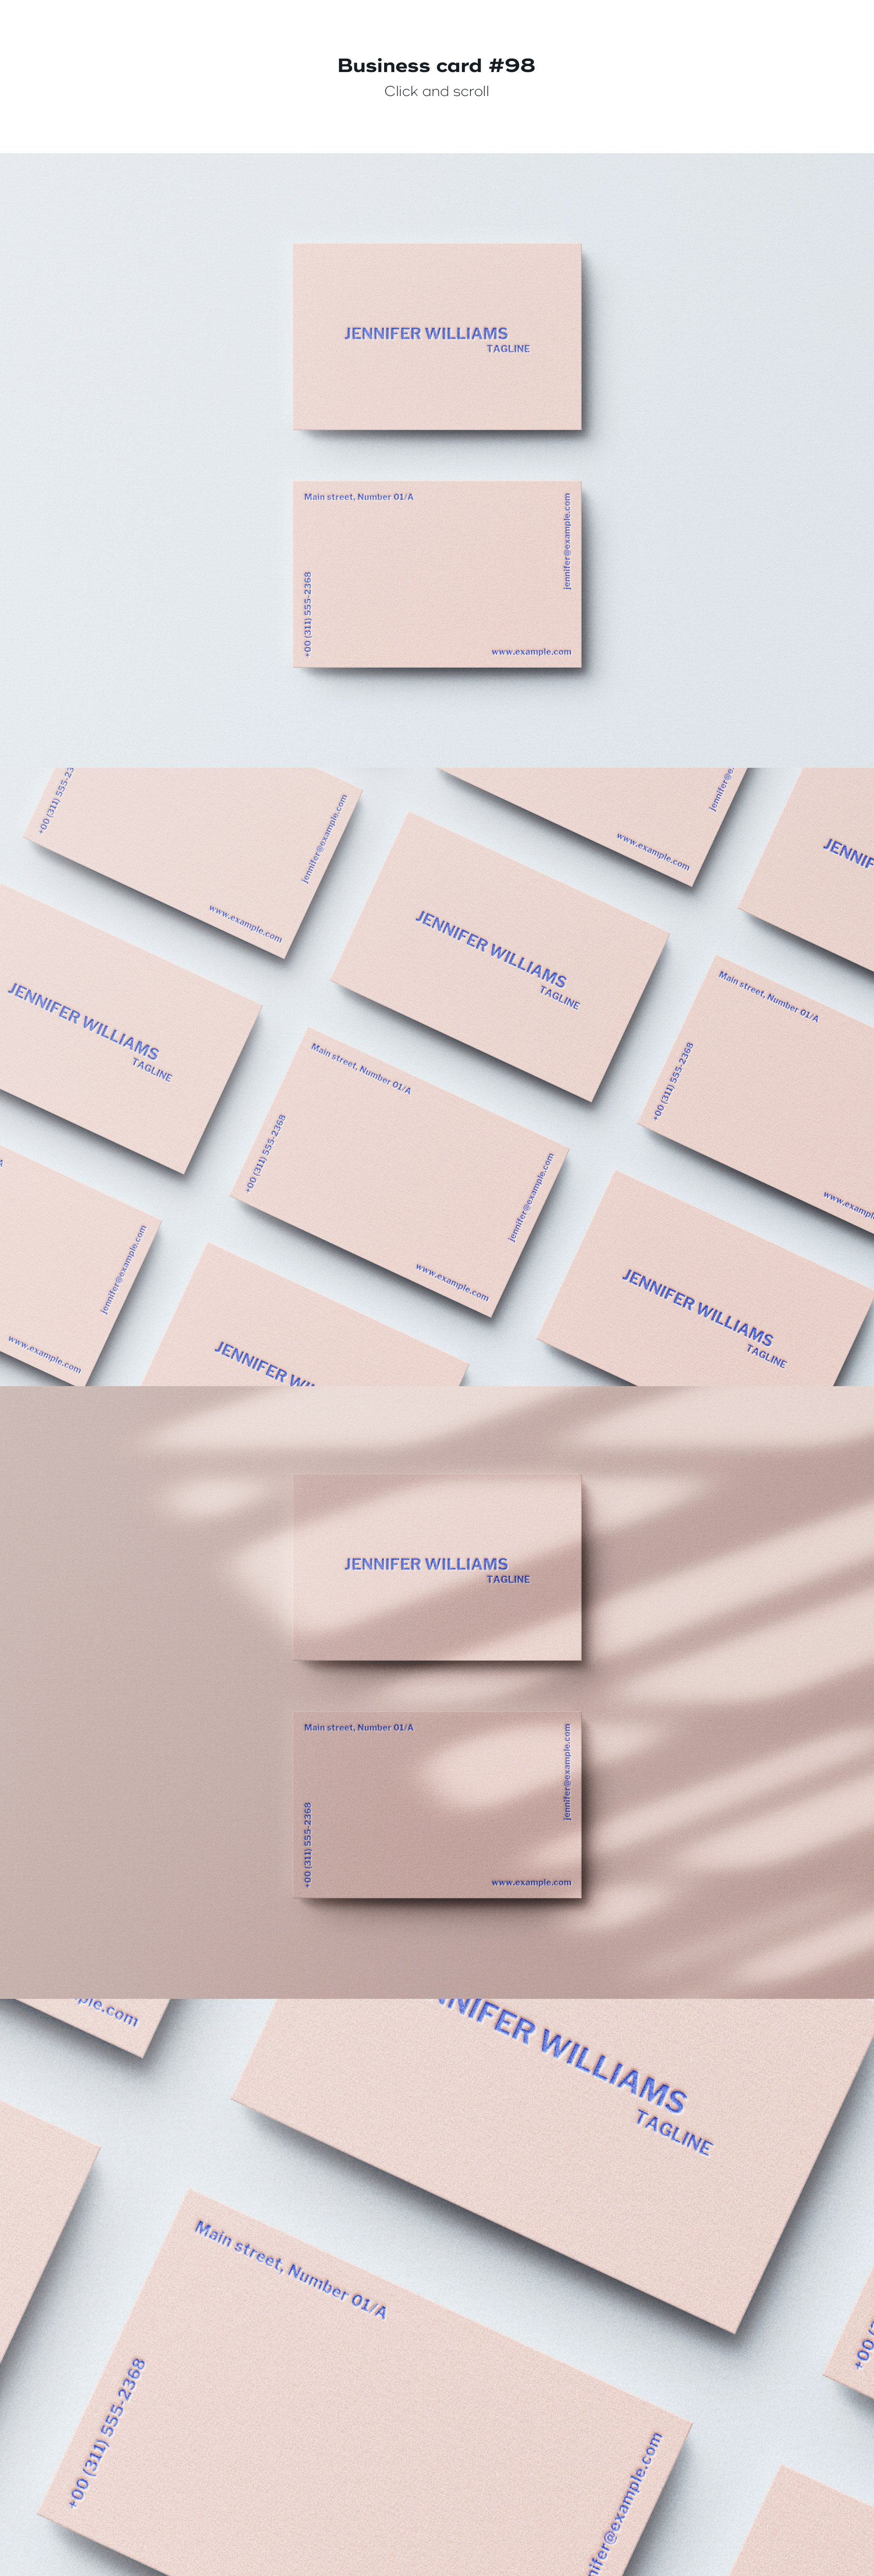 business card 98 815